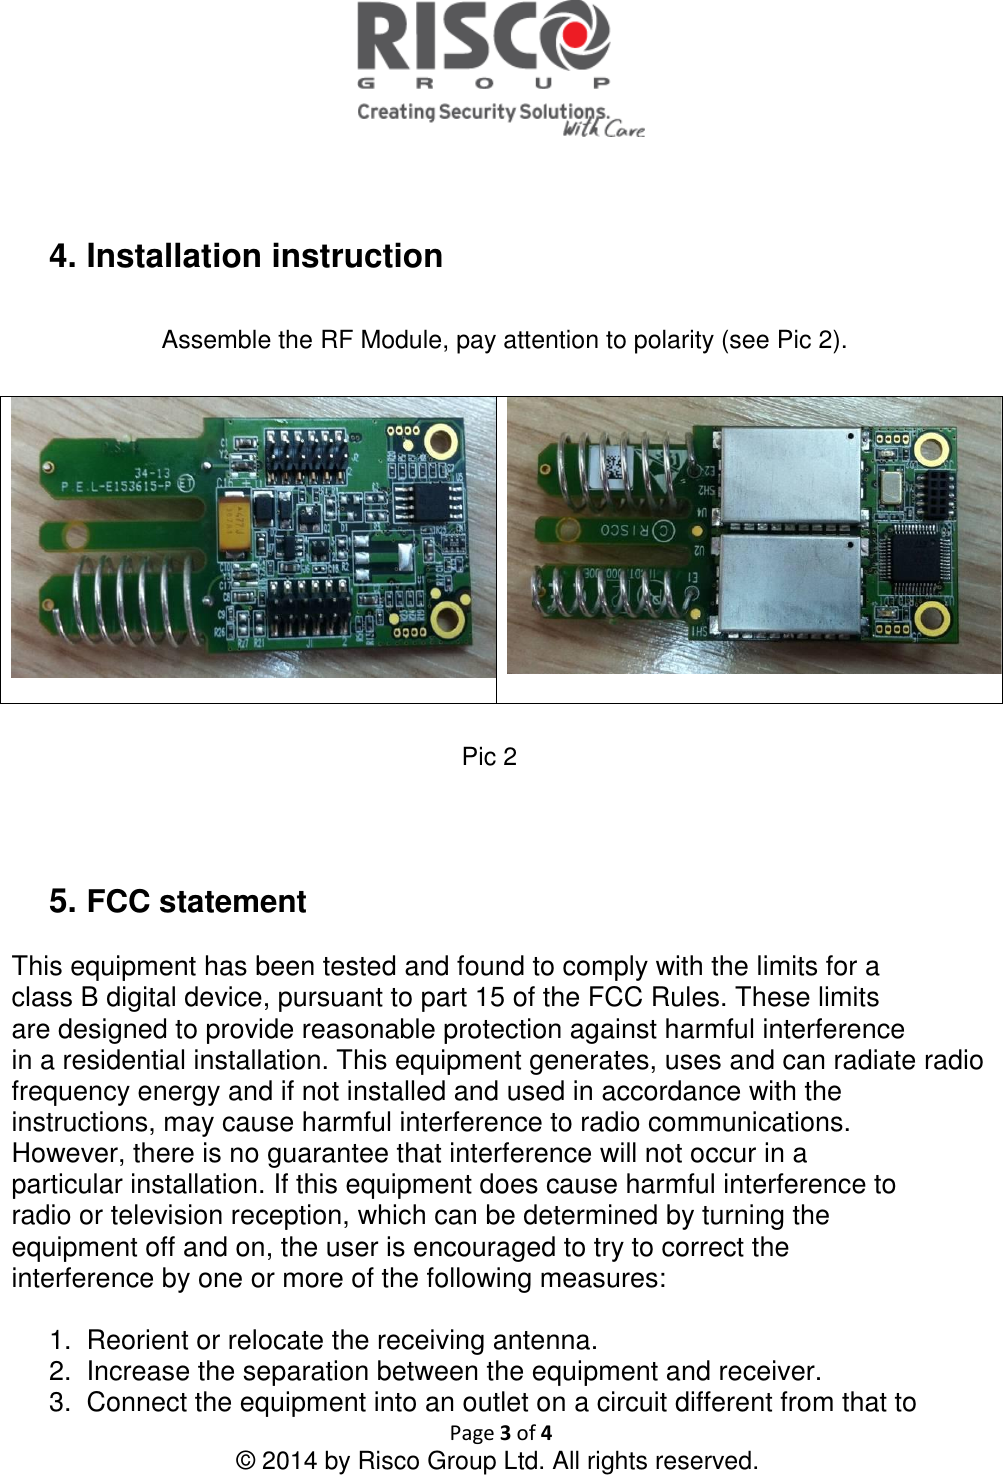   Page 3 of 4 © 2014 by Risco Group Ltd. All rights reserved.    4. Installation instruction   Assemble the RF Module, pay attention to polarity (see Pic 2).     Pic 2    5. FCC statement   This equipment has been tested and found to comply with the limits for a class B digital device, pursuant to part 15 of the FCC Rules. These limits are designed to provide reasonable protection against harmful interference in a residential installation. This equipment generates, uses and can radiate radio frequency energy and if not installed and used in accordance with the instructions, may cause harmful interference to radio communications. However, there is no guarantee that interference will not occur in a particular installation. If this equipment does cause harmful interference to radio or television reception, which can be determined by turning the equipment off and on, the user is encouraged to try to correct the interference by one or more of the following measures:  1.  Reorient or relocate the receiving antenna. 2.  Increase the separation between the equipment and receiver. 3.  Connect the equipment into an outlet on a circuit different from that to 